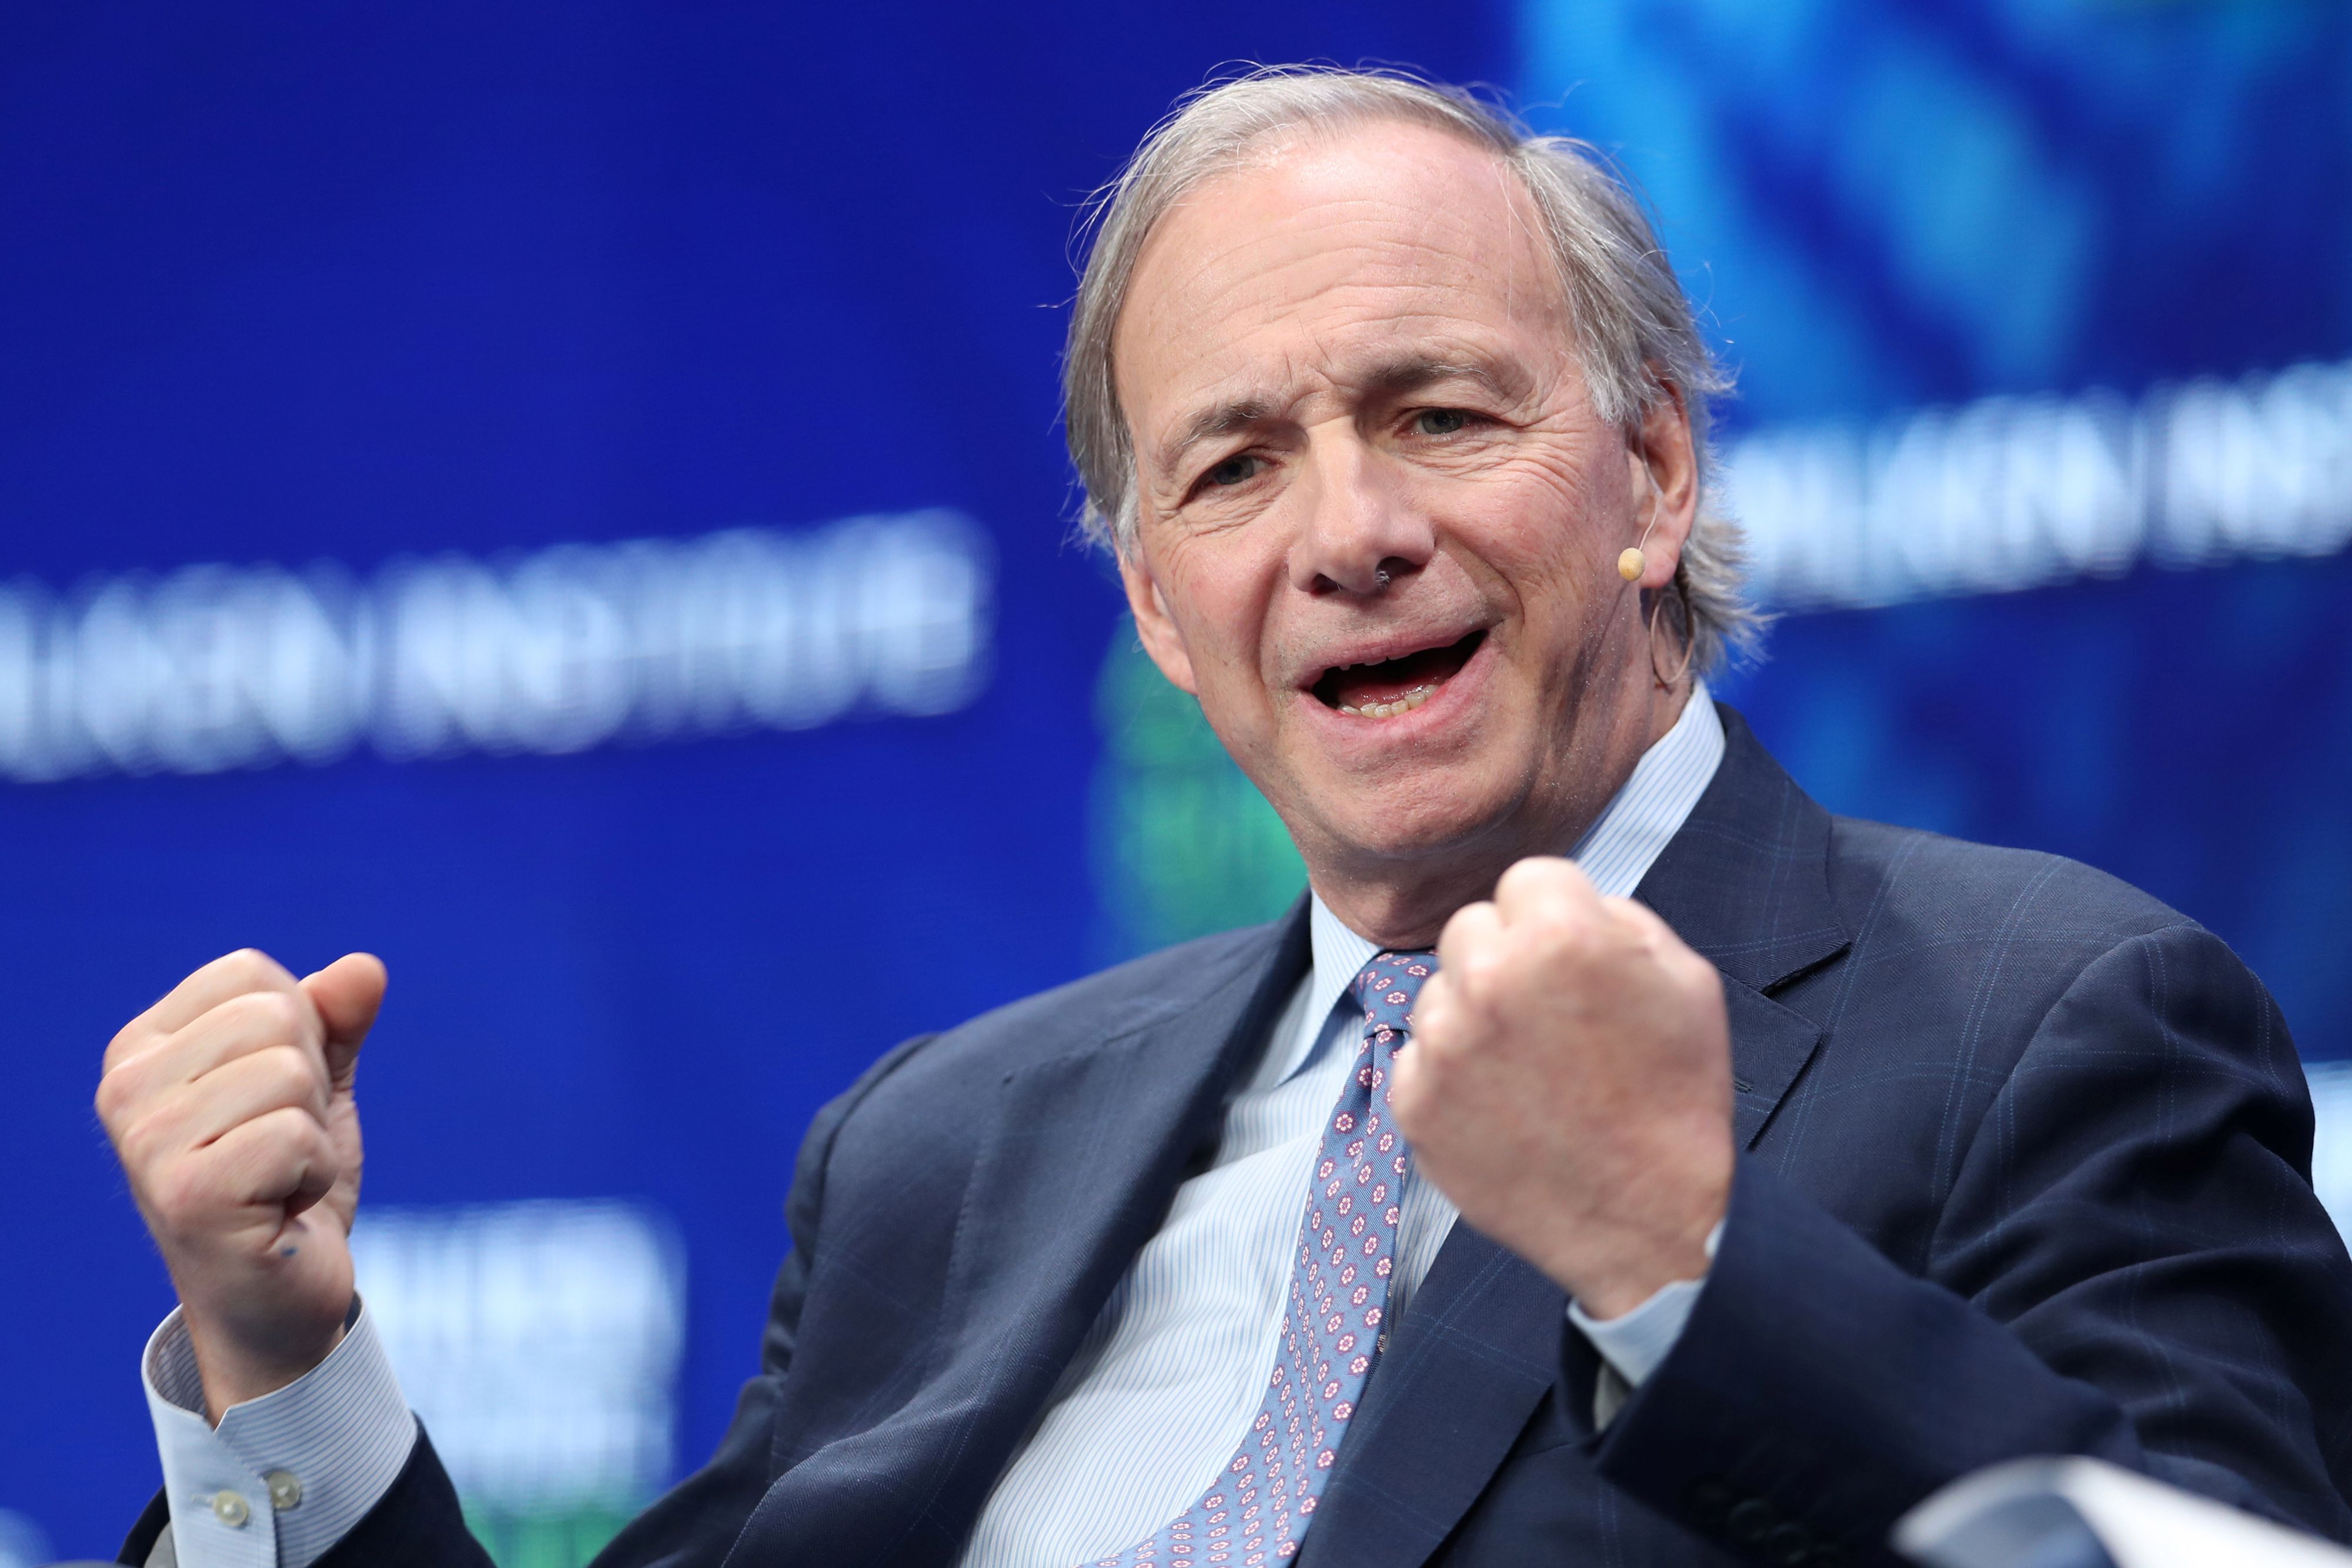 Ray Dalio says the world is in a ‘nice sag’ and echoes the 1930s